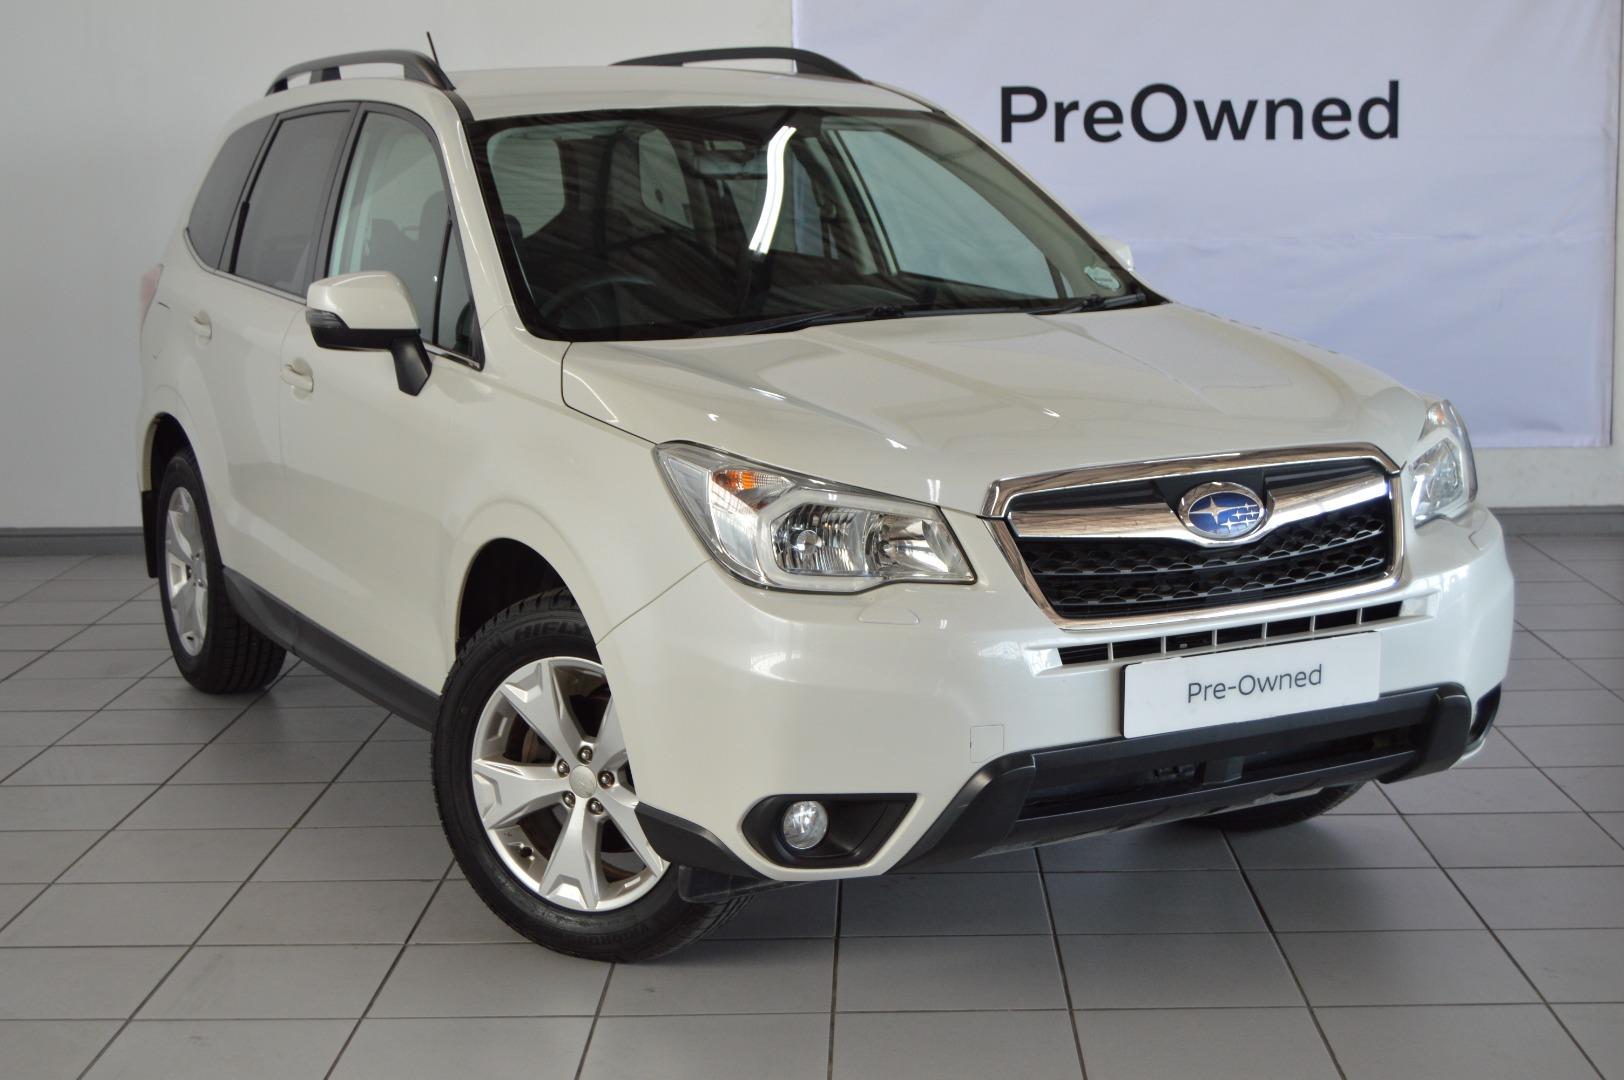 2015 Subaru Forester 2.5 XS For Sale